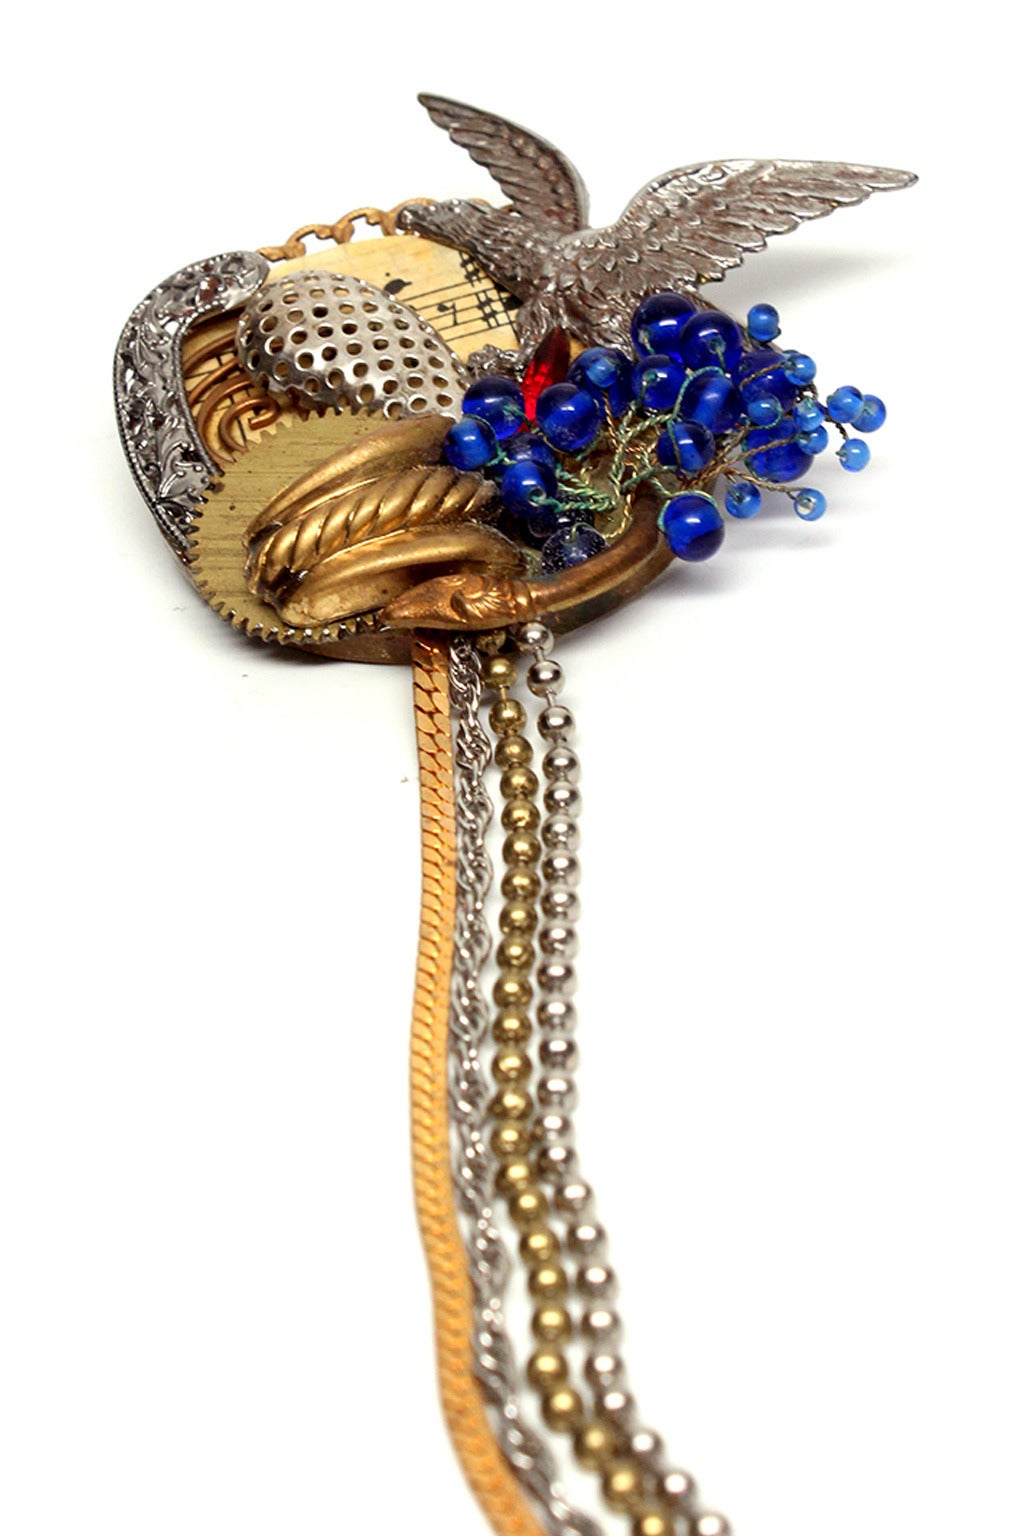 Patriotic and whimsical, these eclectic collage inspired pins are connected by four elegantly draped chains of mixed metals. This Maximal Art double pin is perfect for a creative, individual fashion statement or unique gift. Maximal Art was one of